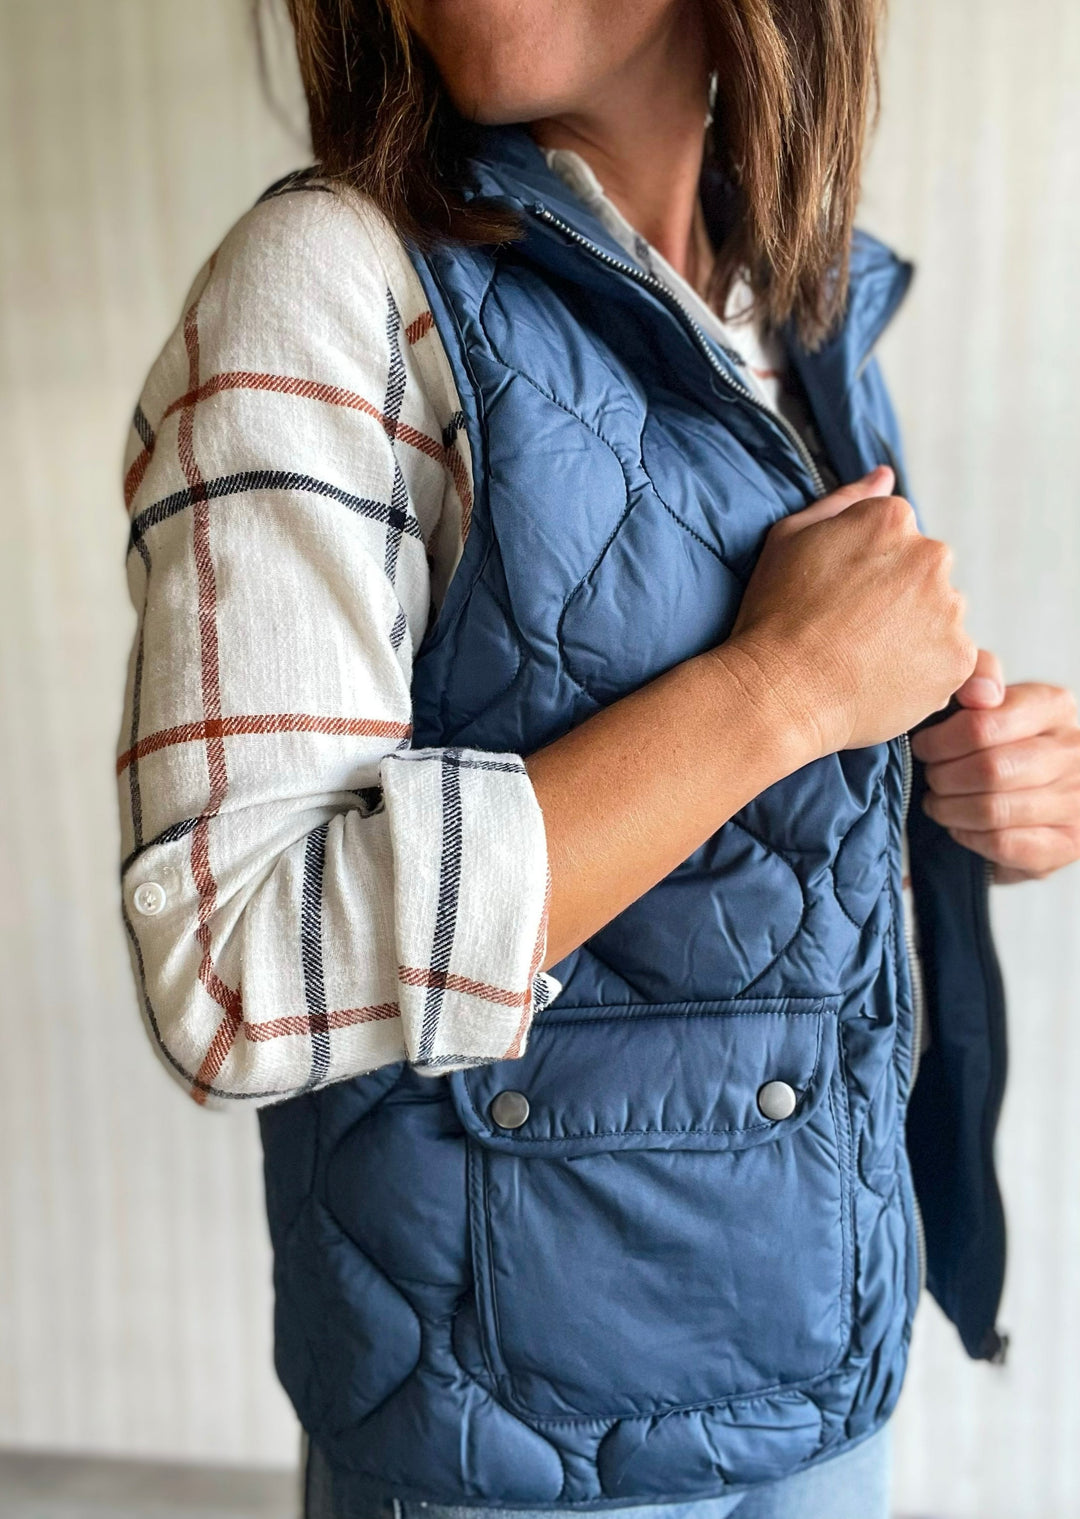 Thread & Supply Blue Vest paired with white, orange, and blue flannel and jeans. Central Illinoi Women's Clothing Boutique.